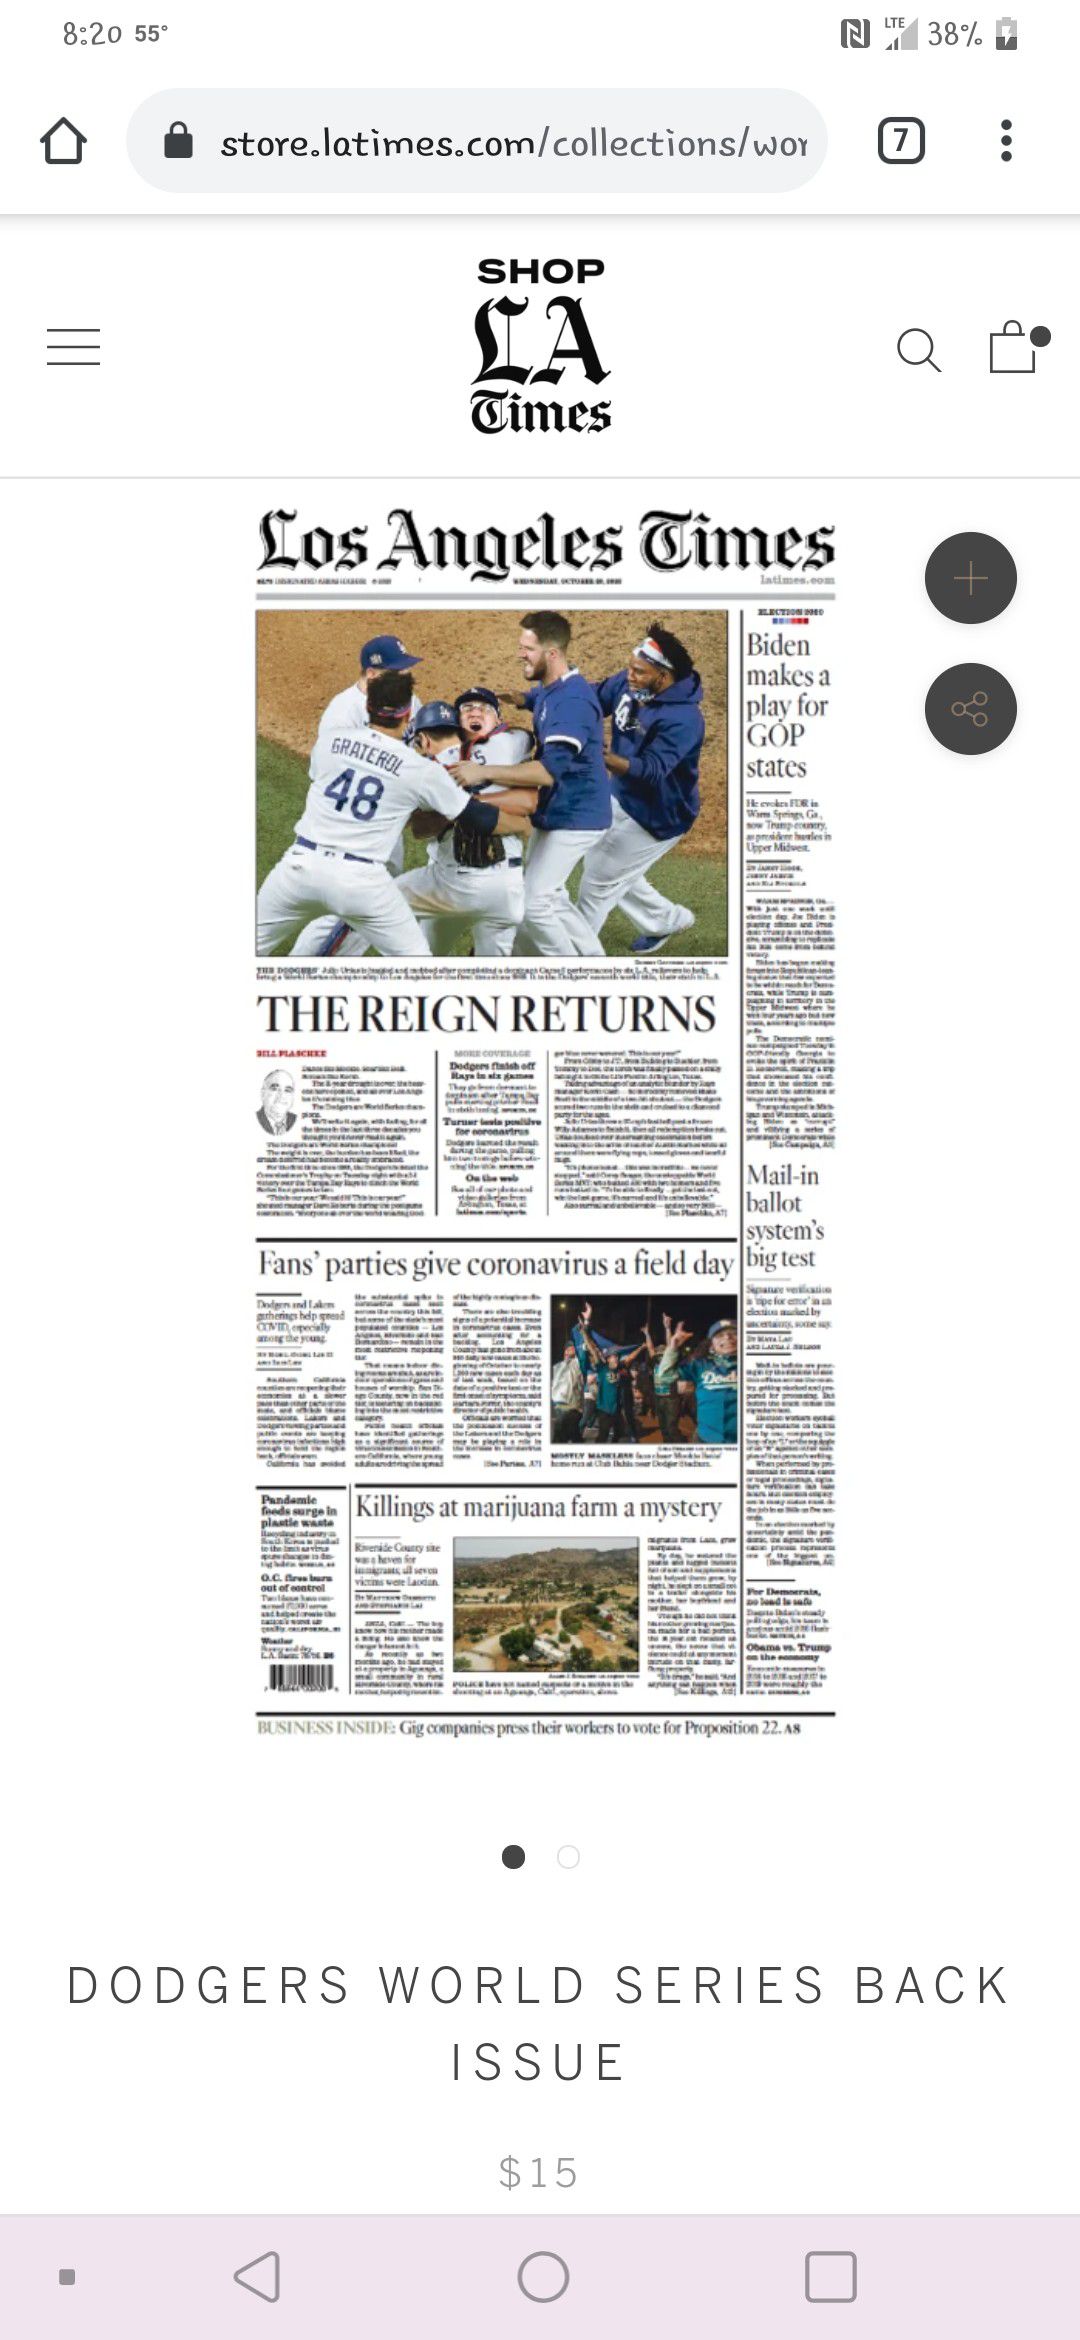 Los Angeles times Dodgers